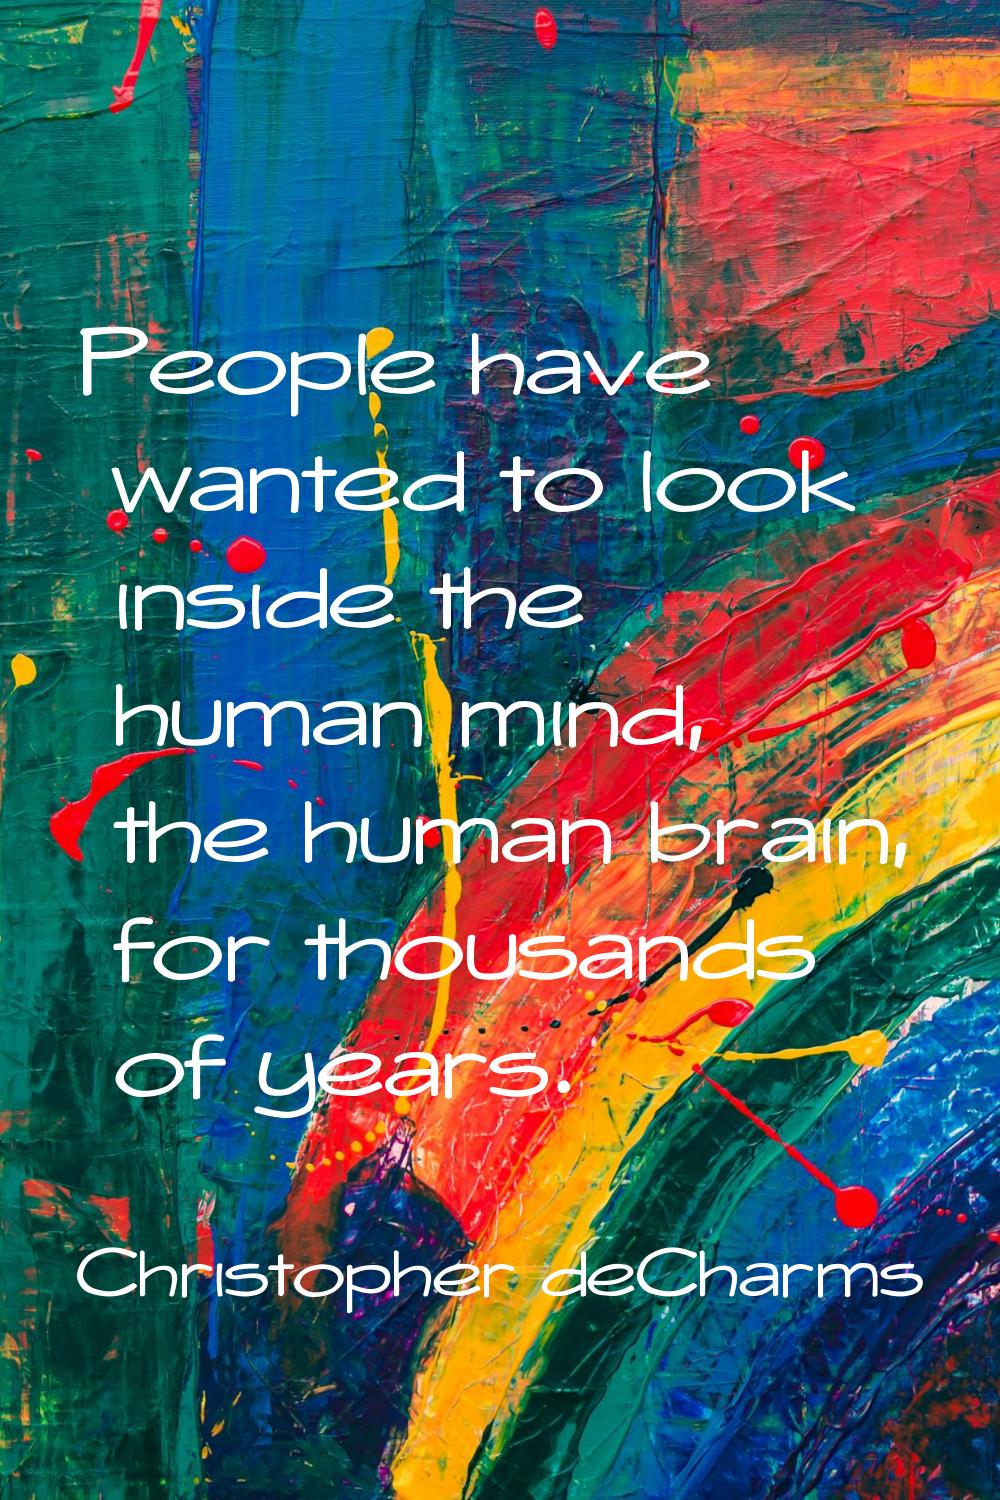 People have wanted to look inside the human mind, the human brain, for thousands of years.